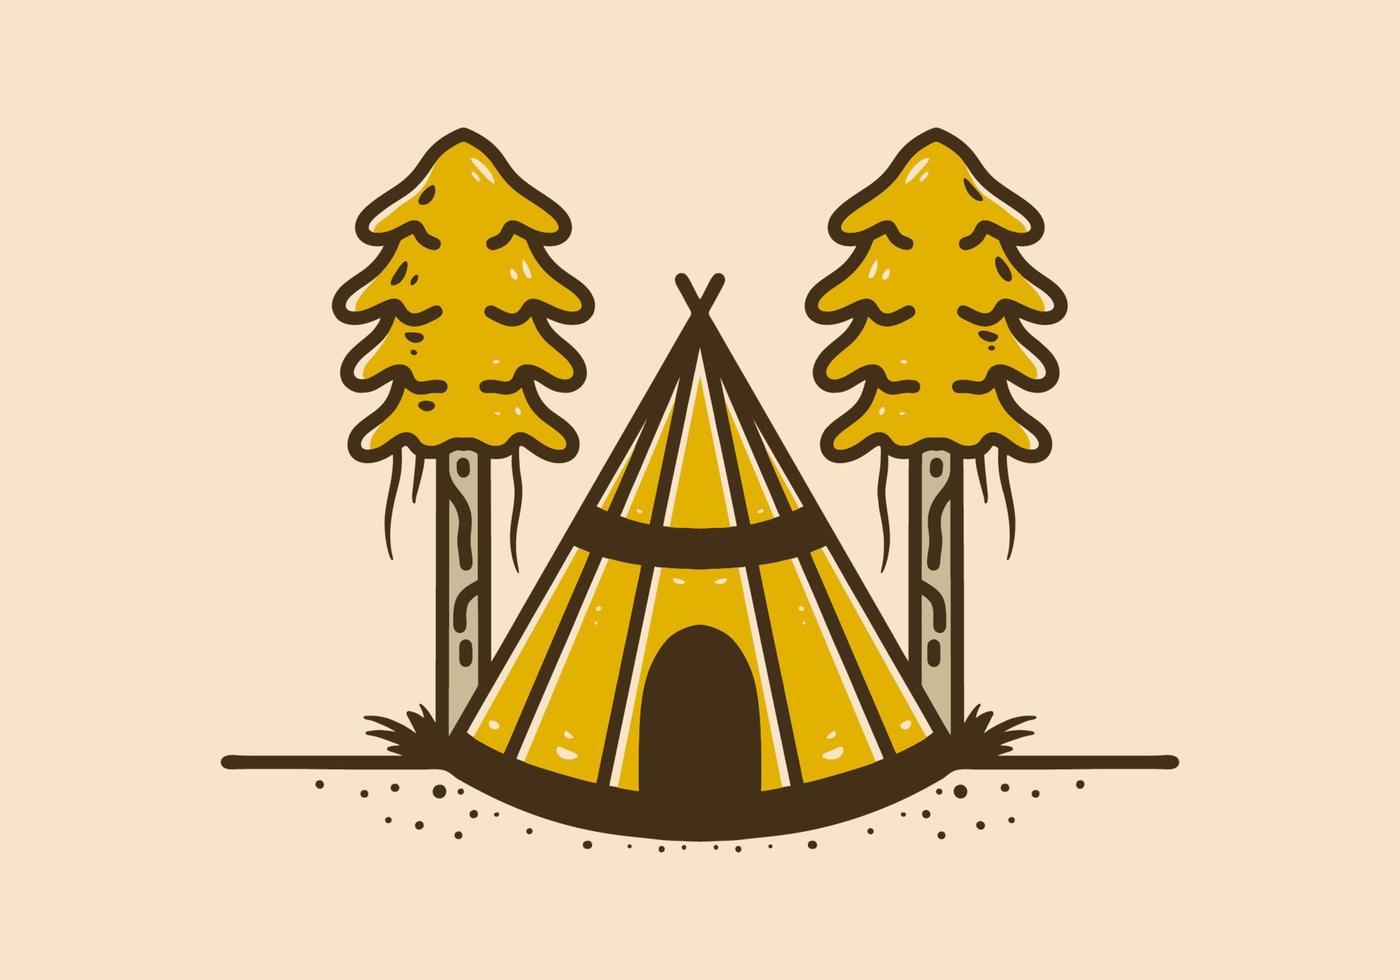 Line art design of a cone tent with two pine trees vector